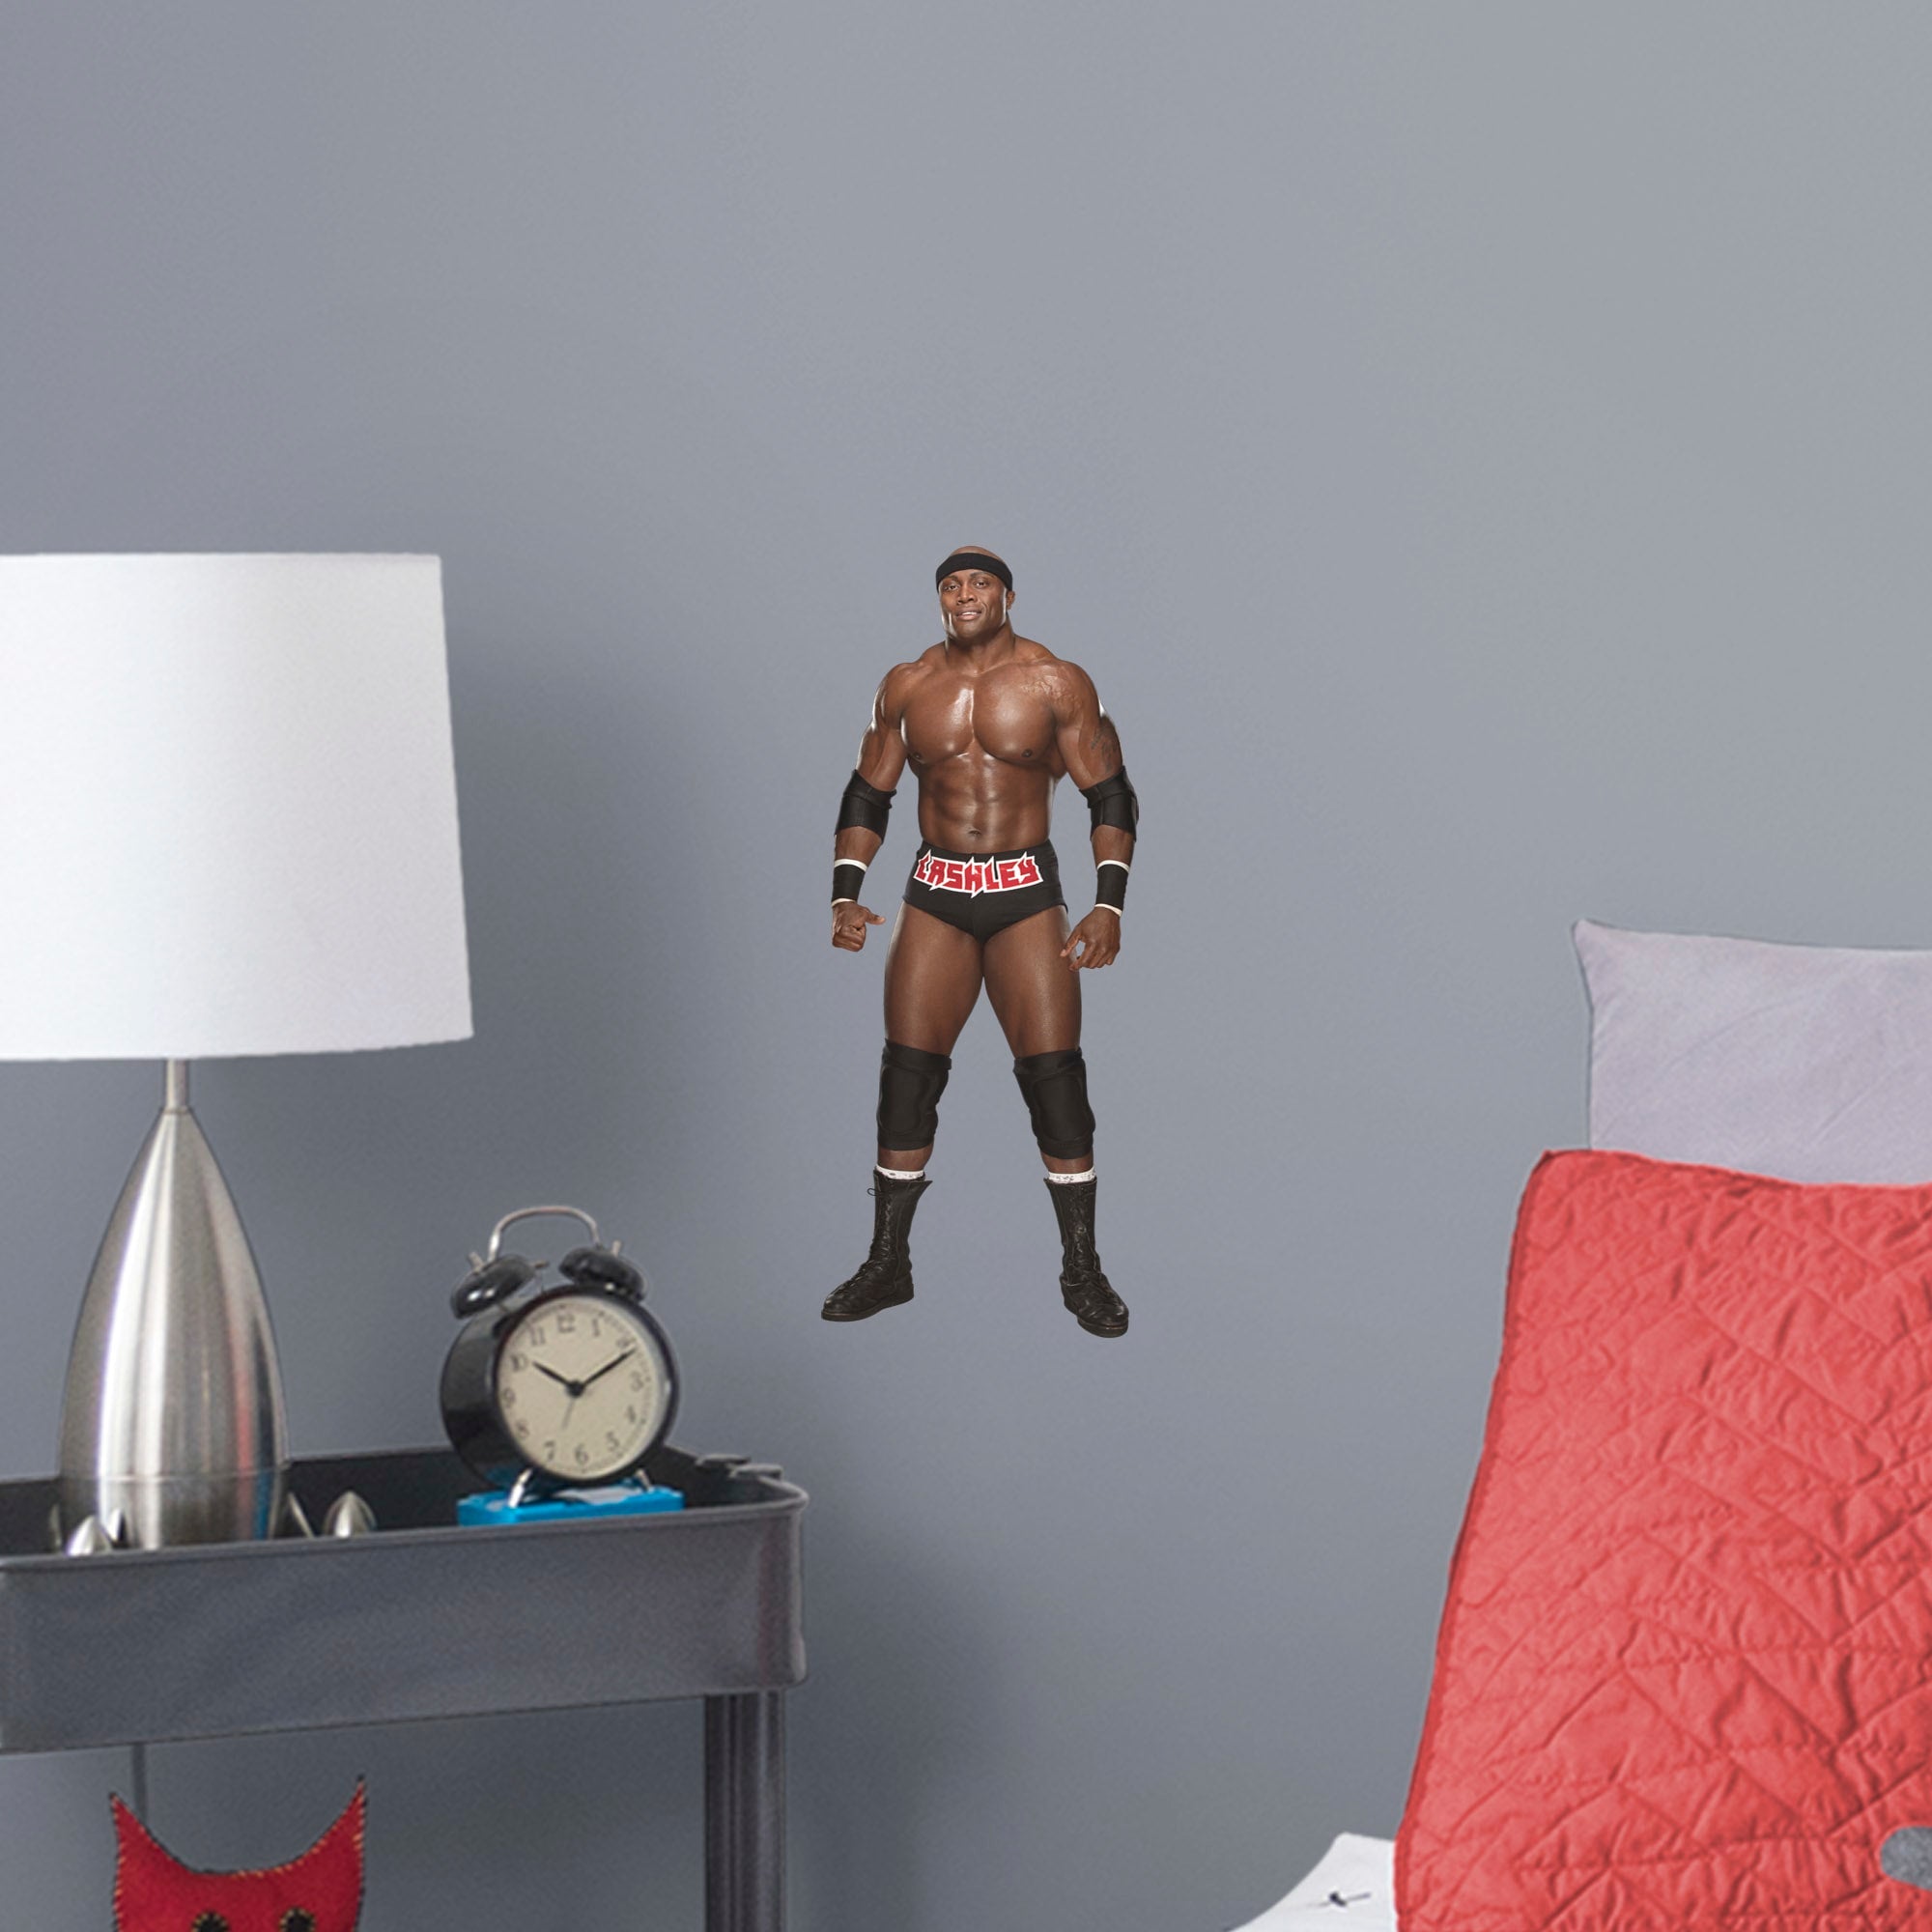 Bobby Lashley for WWE - Officially Licensed Removable Wall Decal Large by Fathead | Vinyl